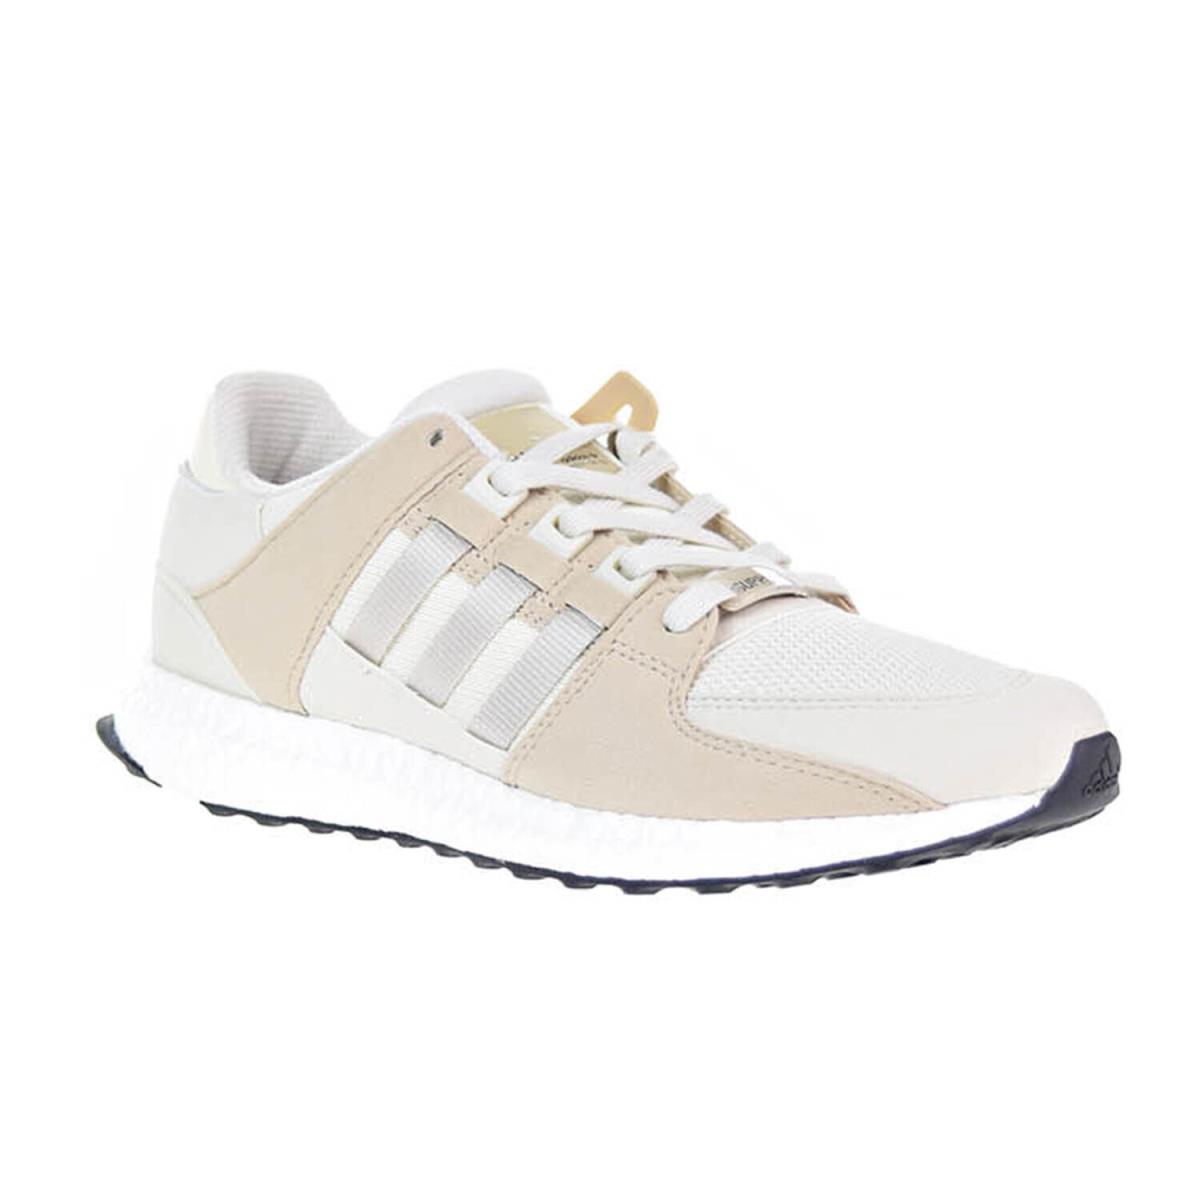 Adidas Eqt Support Ultra Men`s Shoes Cream White bb1239